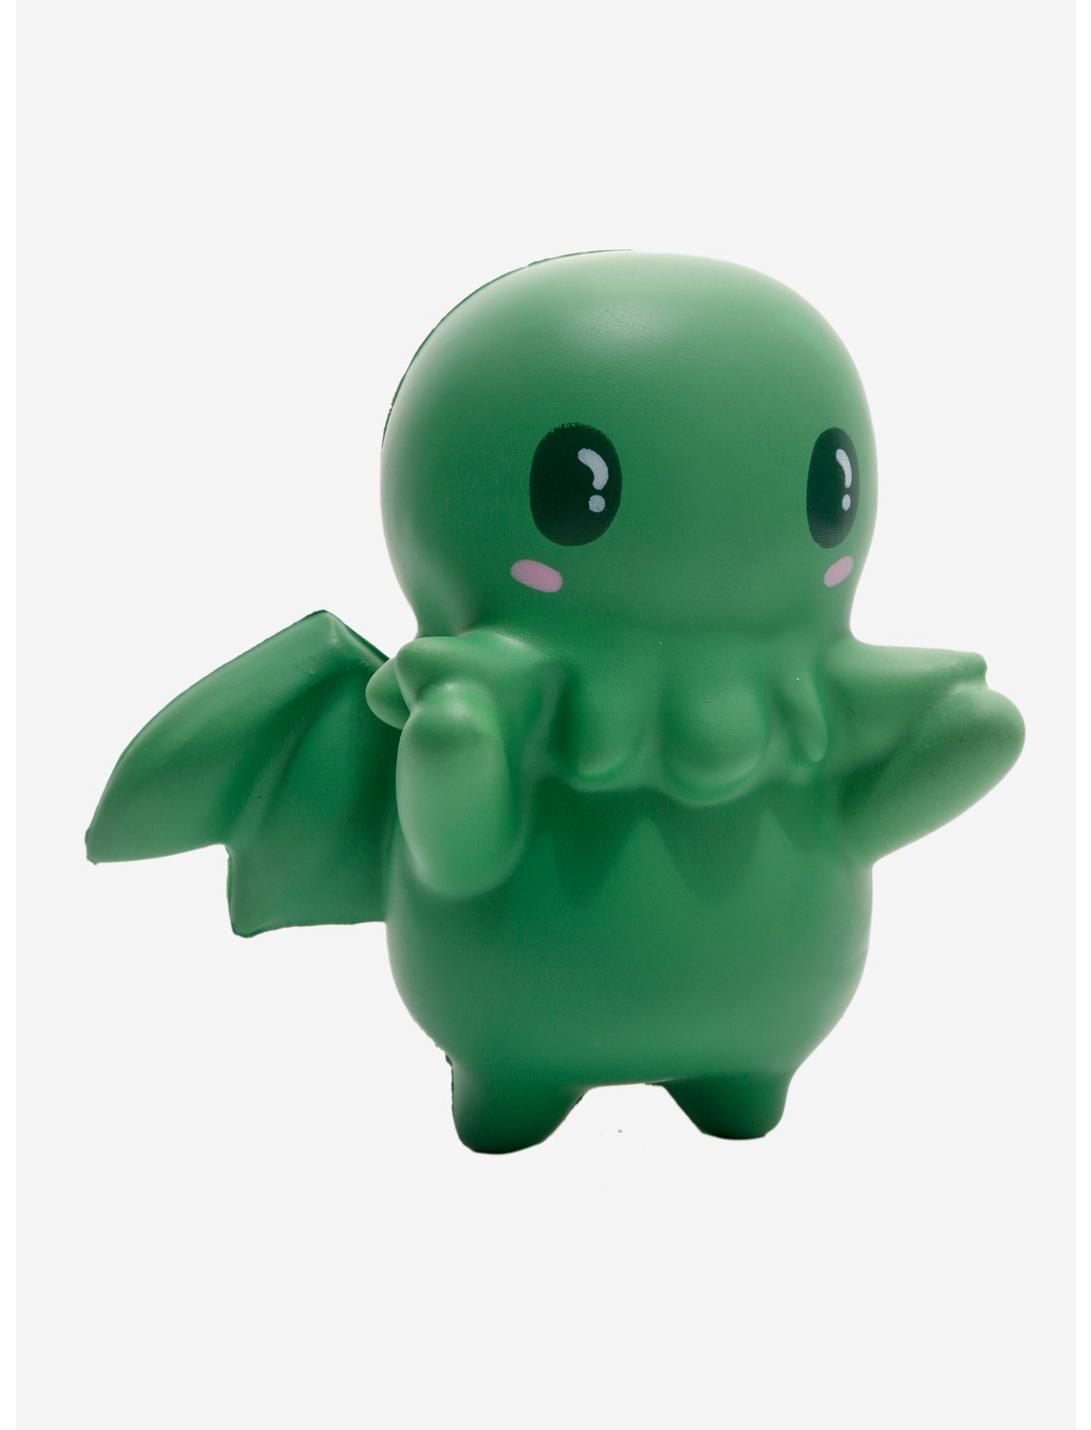 Cthulhu Squishy Toy Hot Topic Exclusive, , hi-res